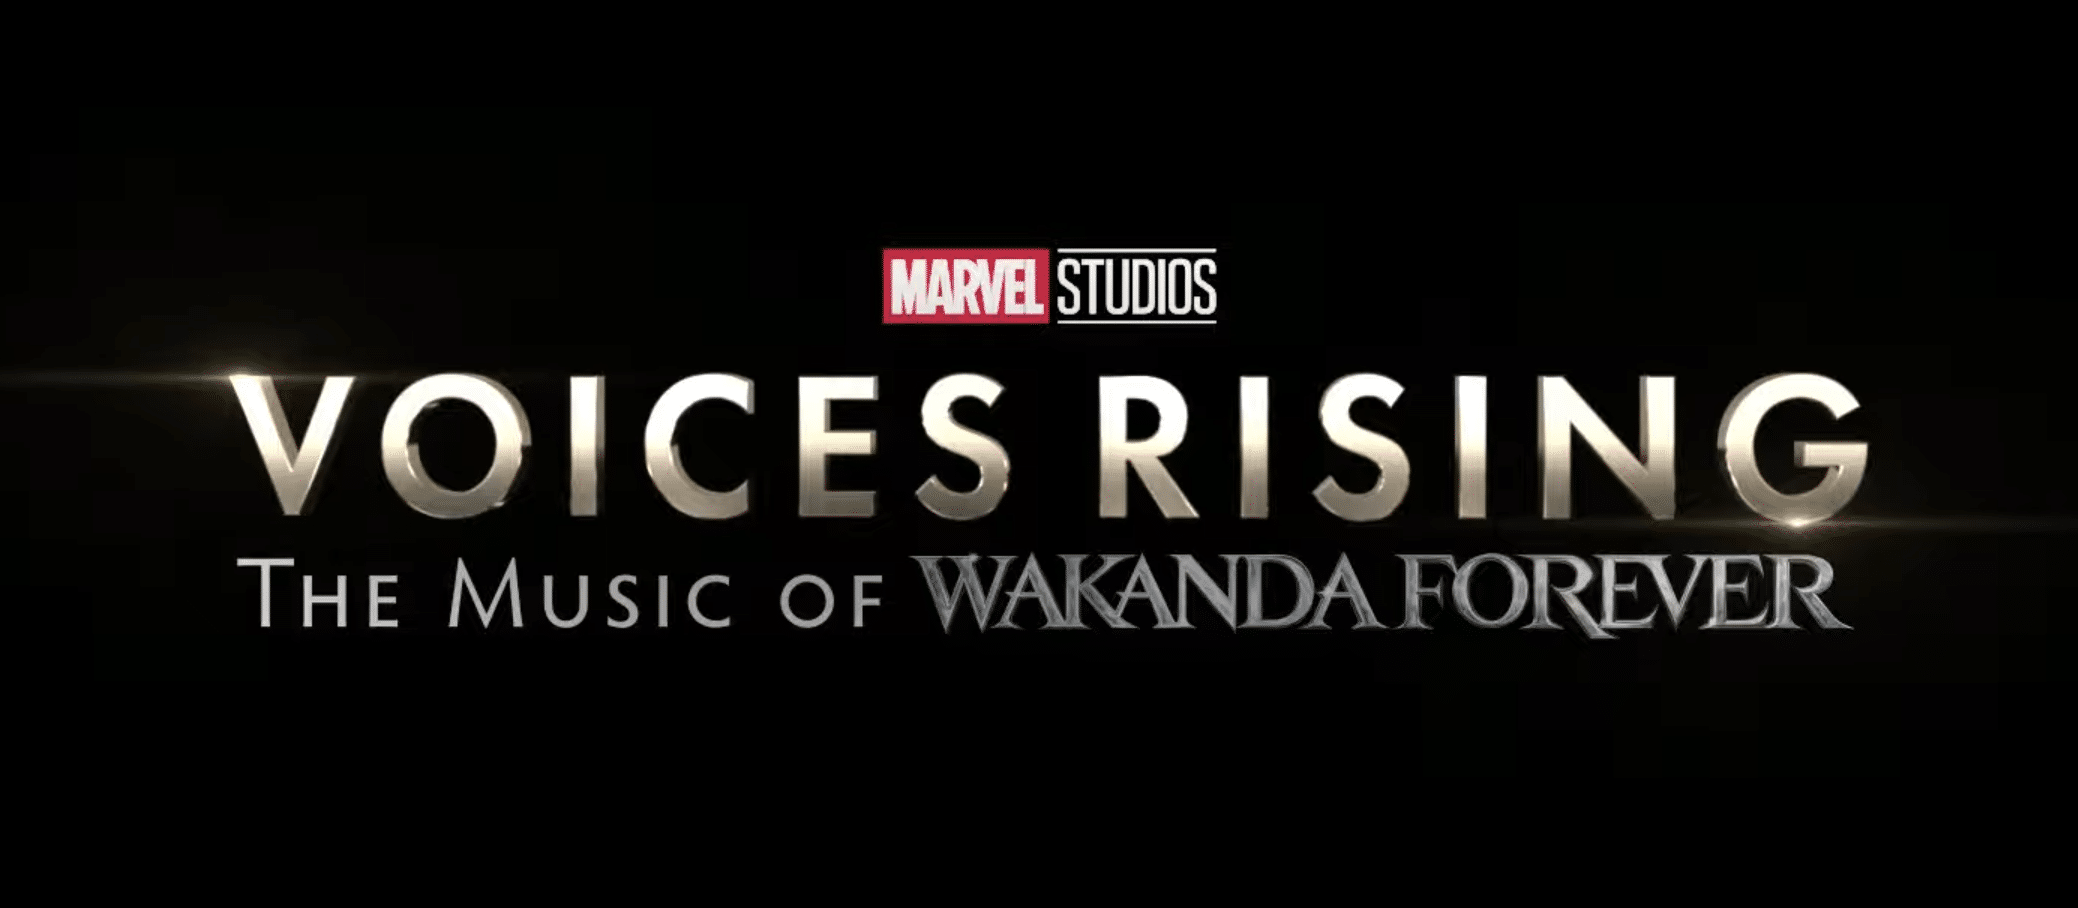 Voices Rising The Music of Wakanda Forever